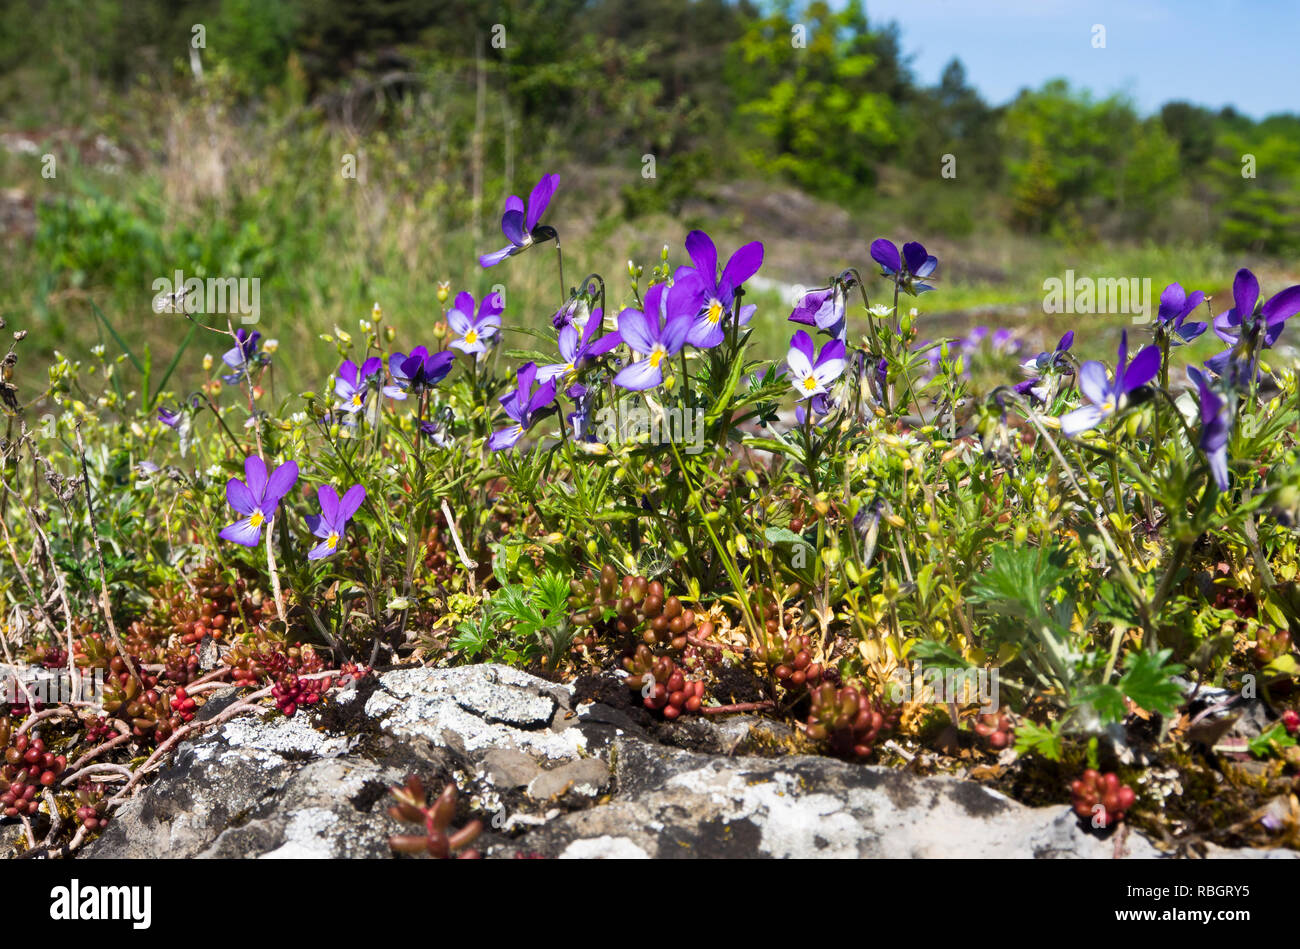 Viola tricolor or Johnny Jump up, in Rambergoya, an island in the Oslo Fjord Norway Stock Photo